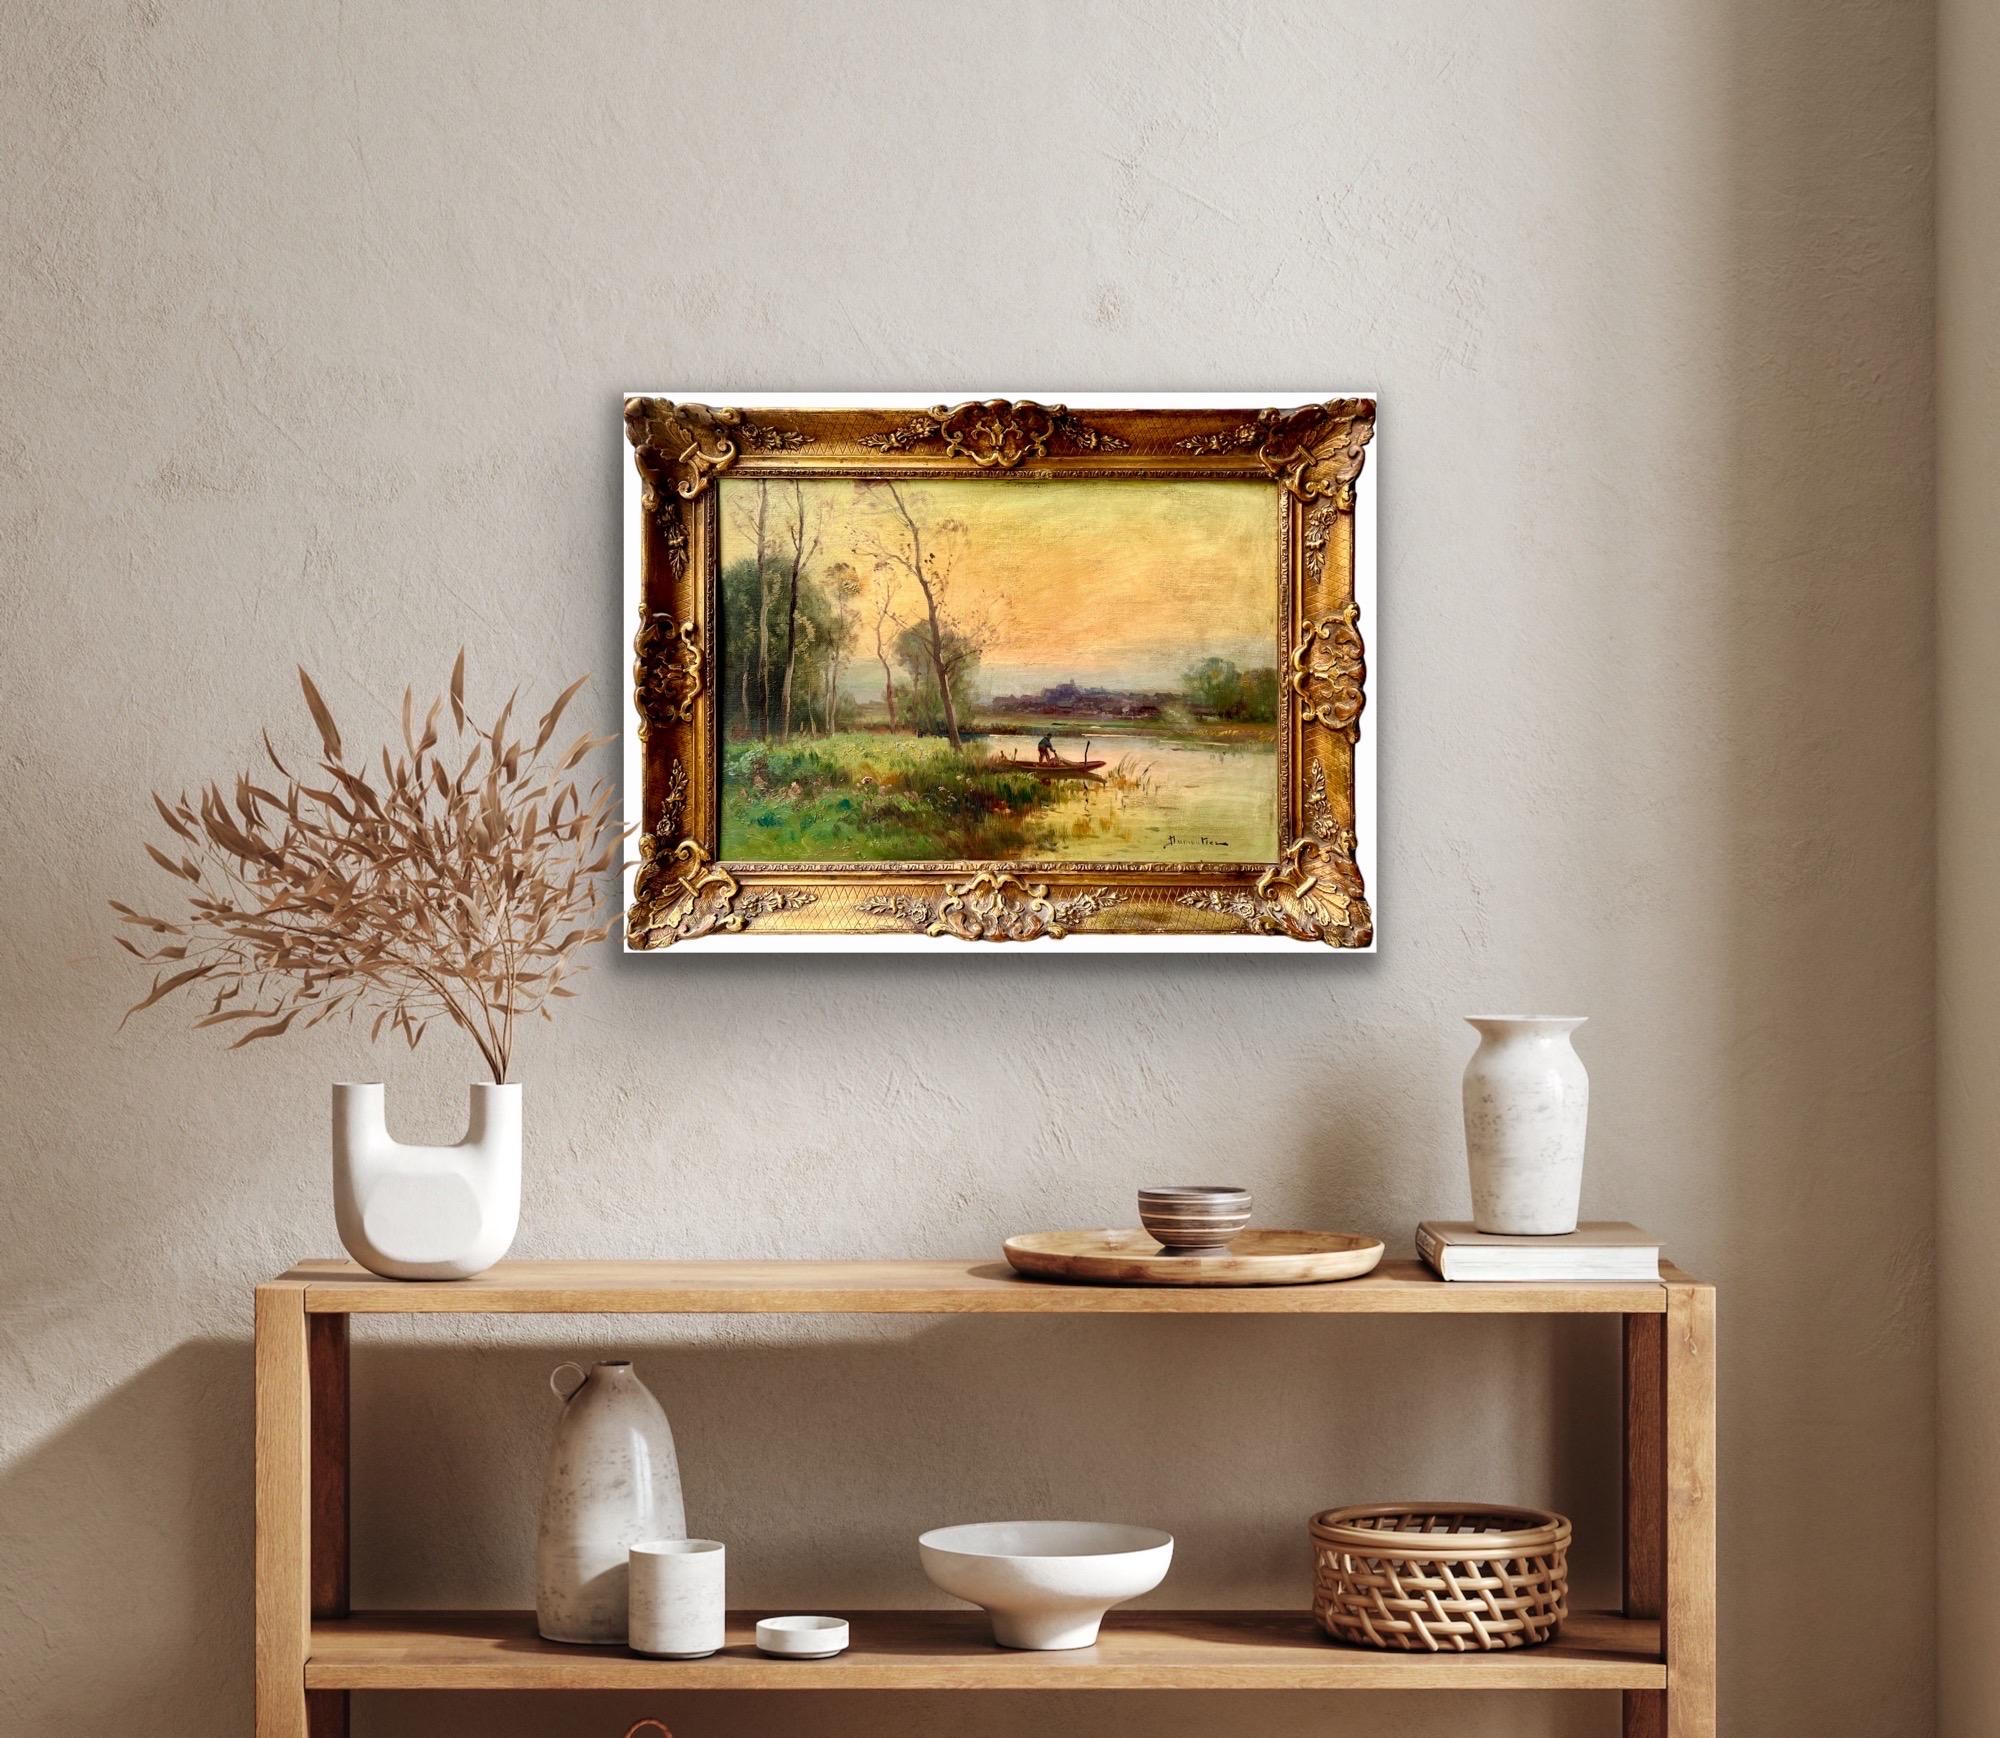 19th century French painting - Fisherman retuning home in a sunset landscape For Sale 1